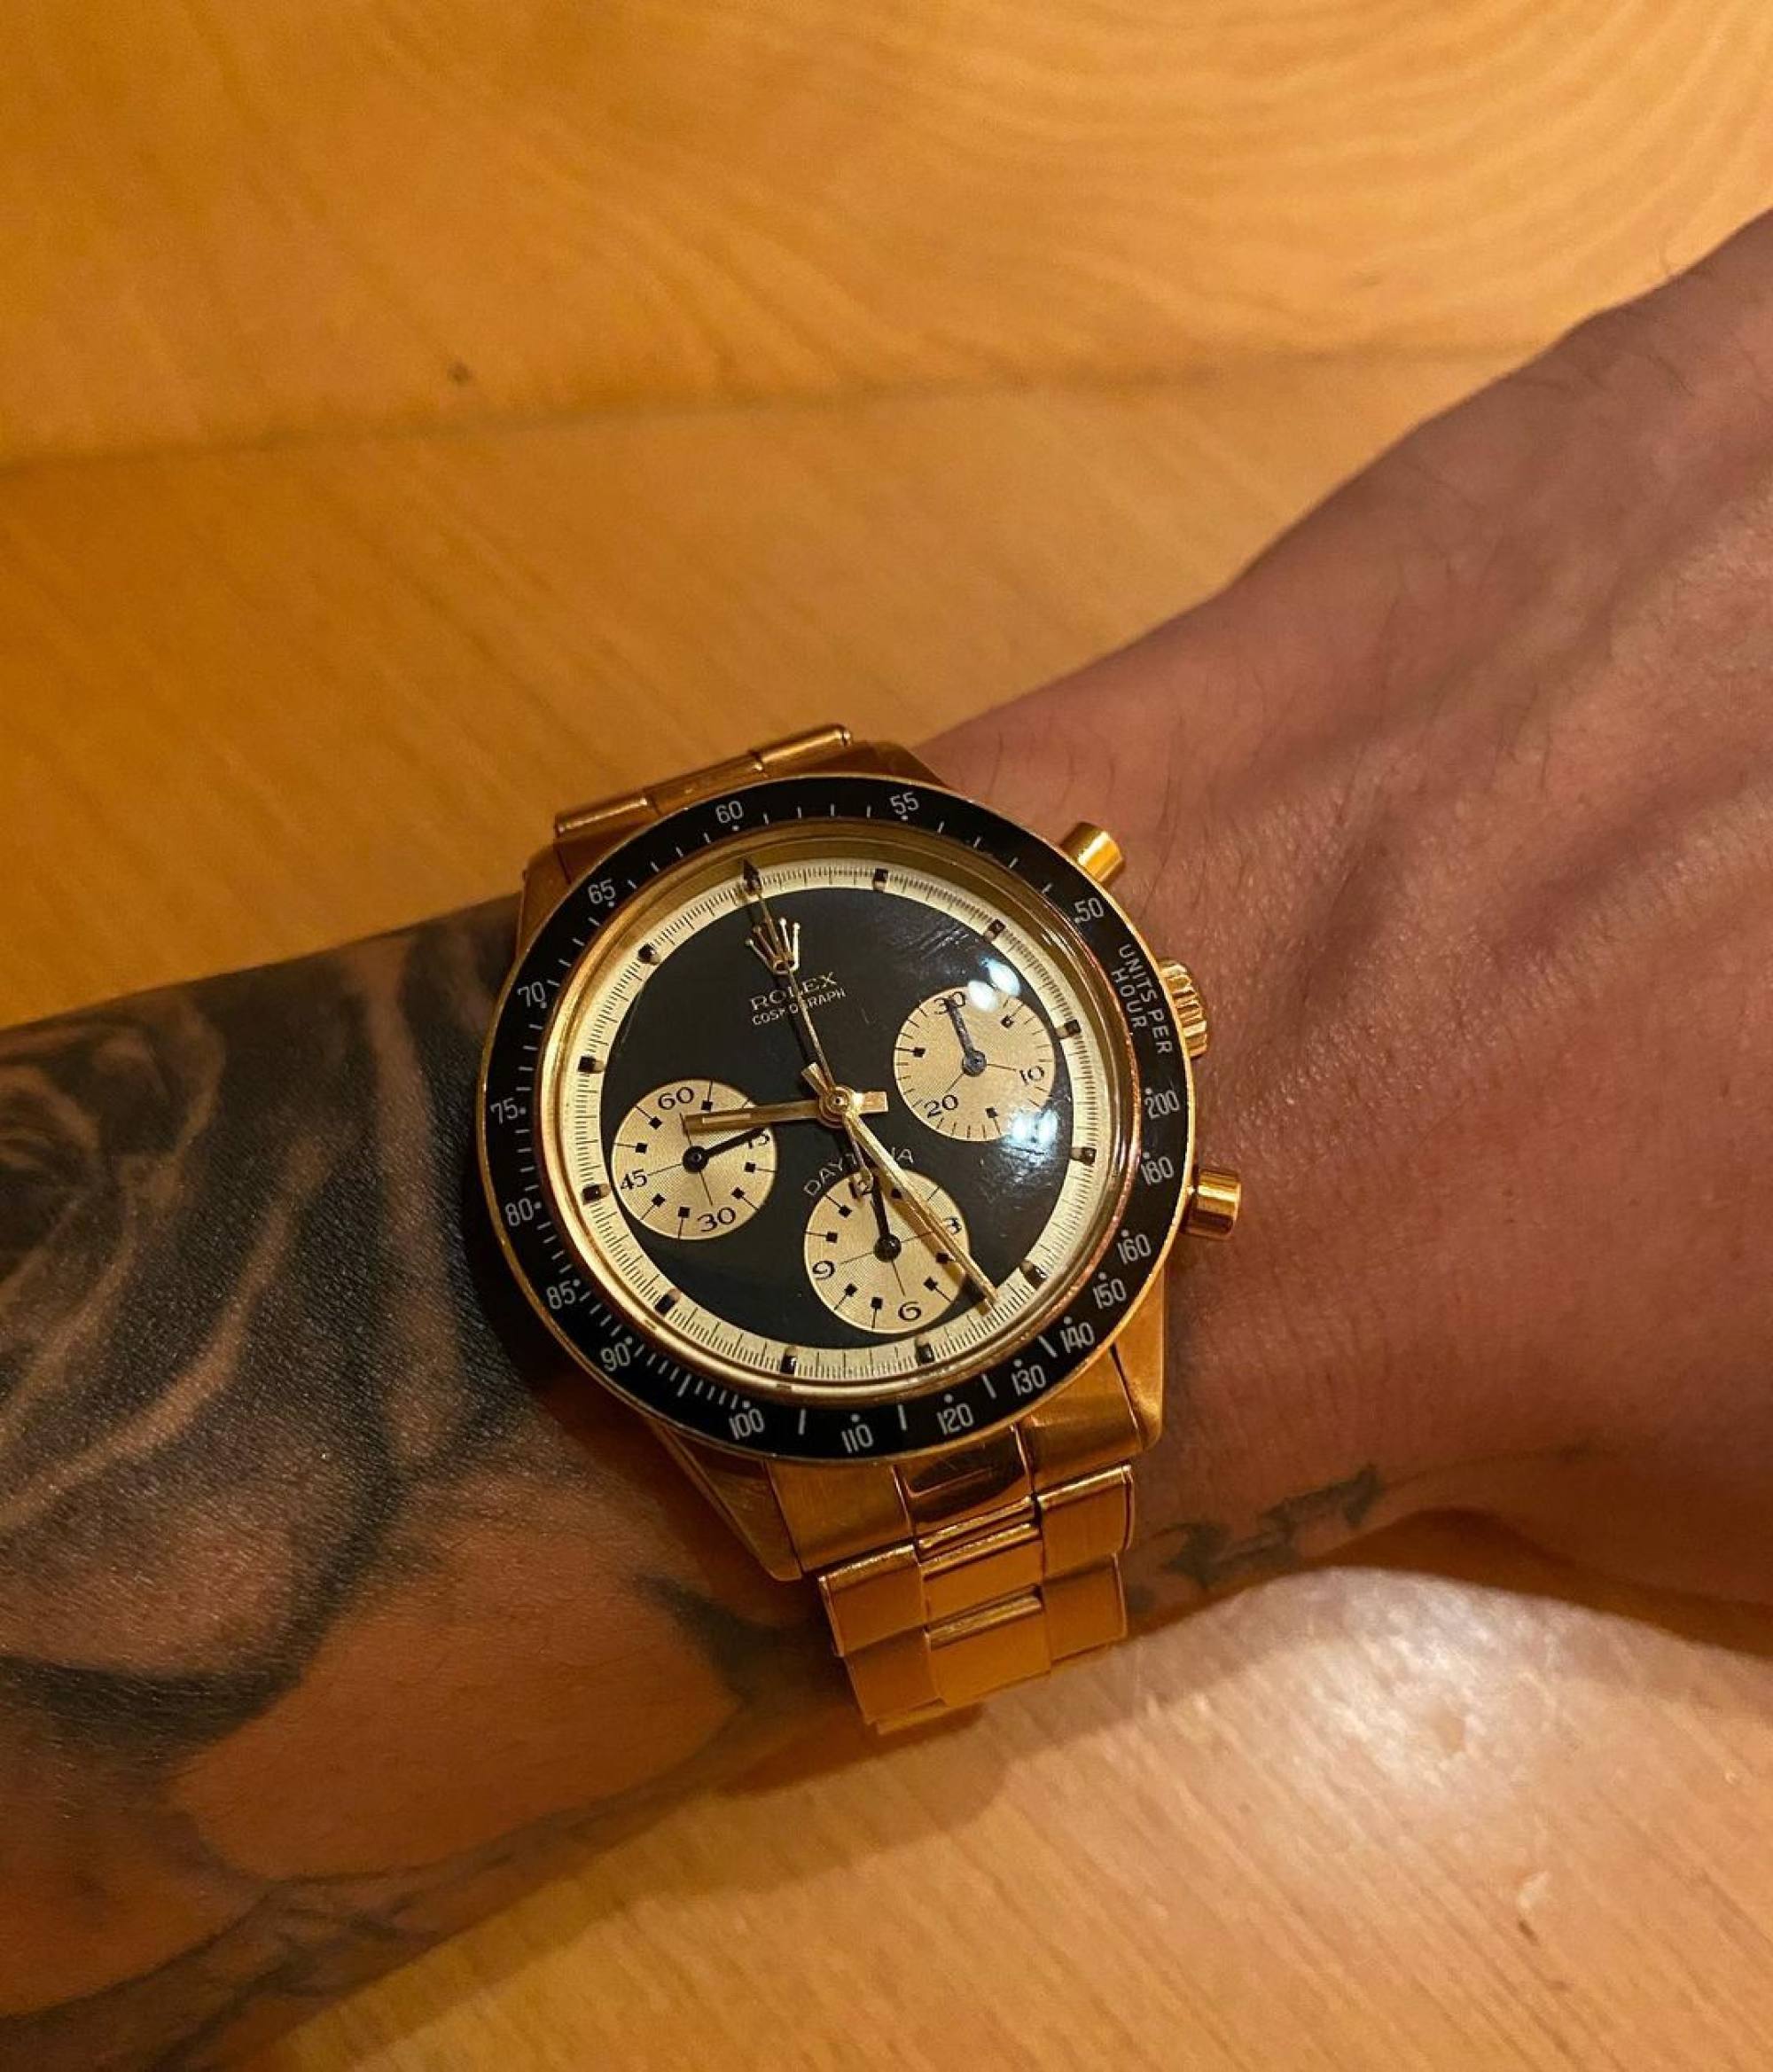 Shawn Yue on Instagram: Louis Vuitton New Tambour Watch